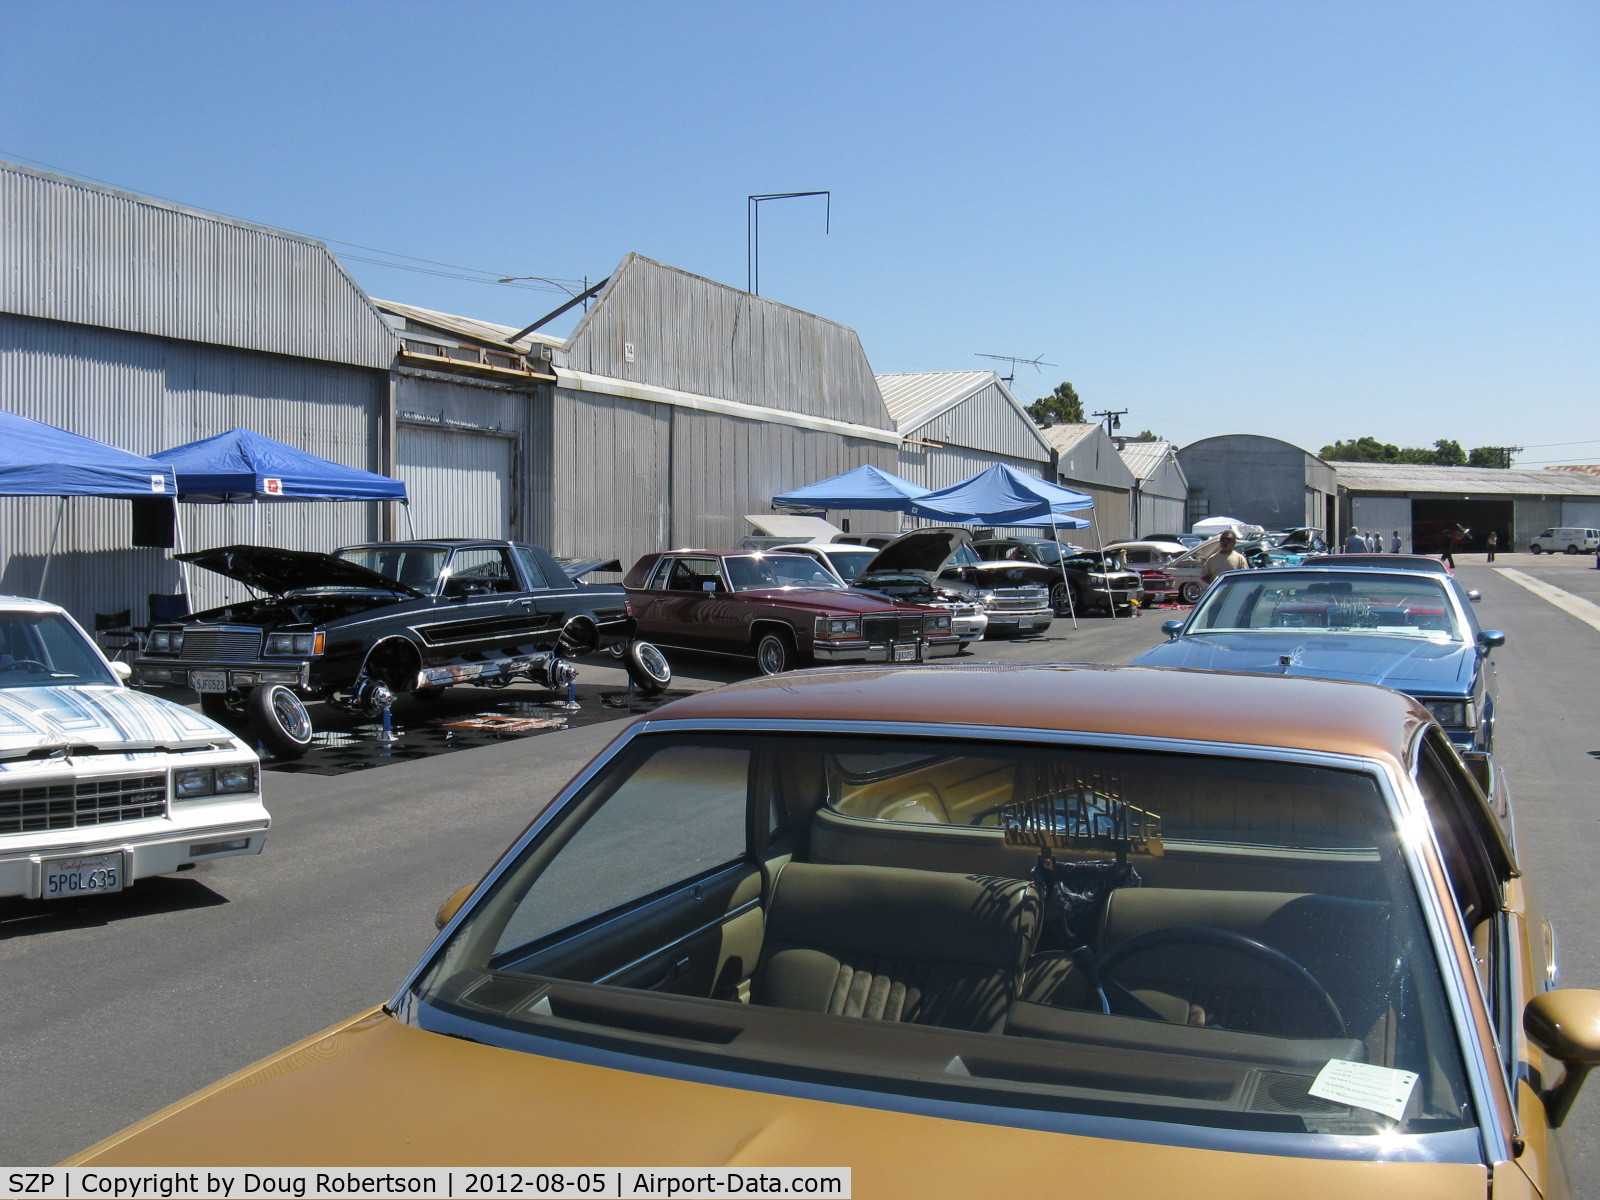 Santa Paula Airport (SZP) - First Sunday Aviation Museum of Santa Paula Open House & Fly-In invites car clubs-another hydraulically jacked up custom car showing suspension, hydraulics and custom wheels. 